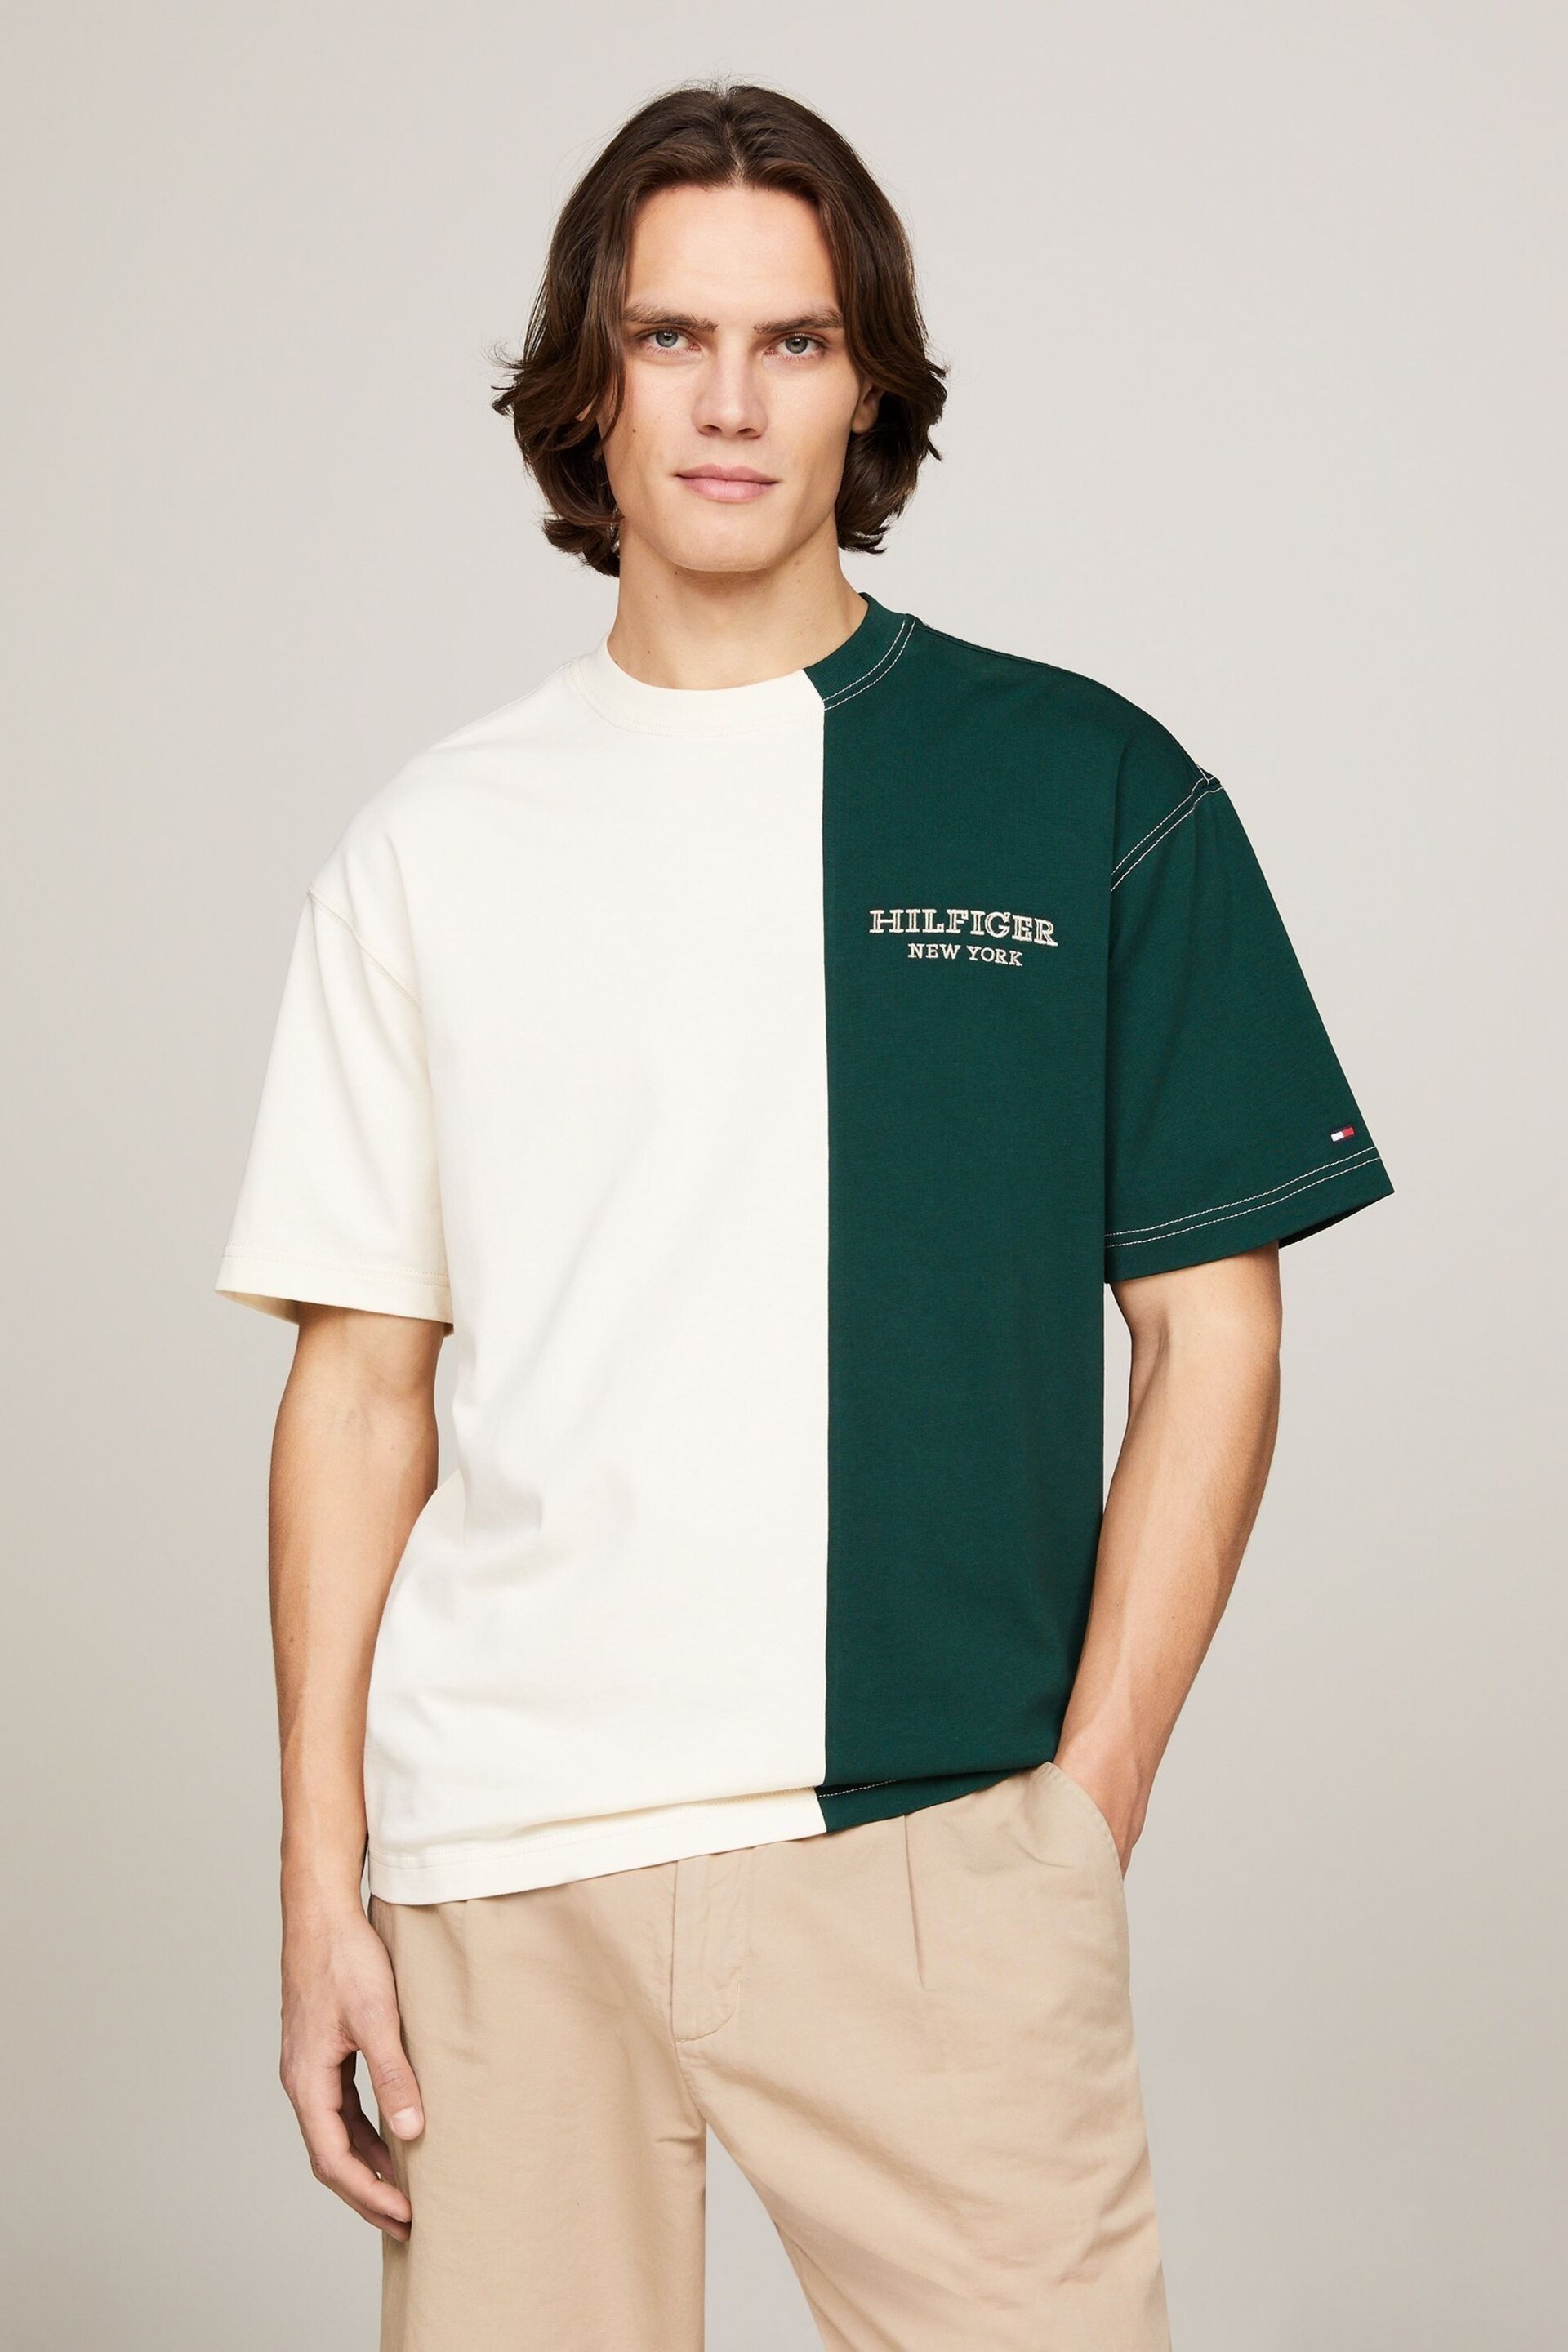 Tommy Hilfiger Green Monotype Colourblock T-Shirt - Image 1 of 3